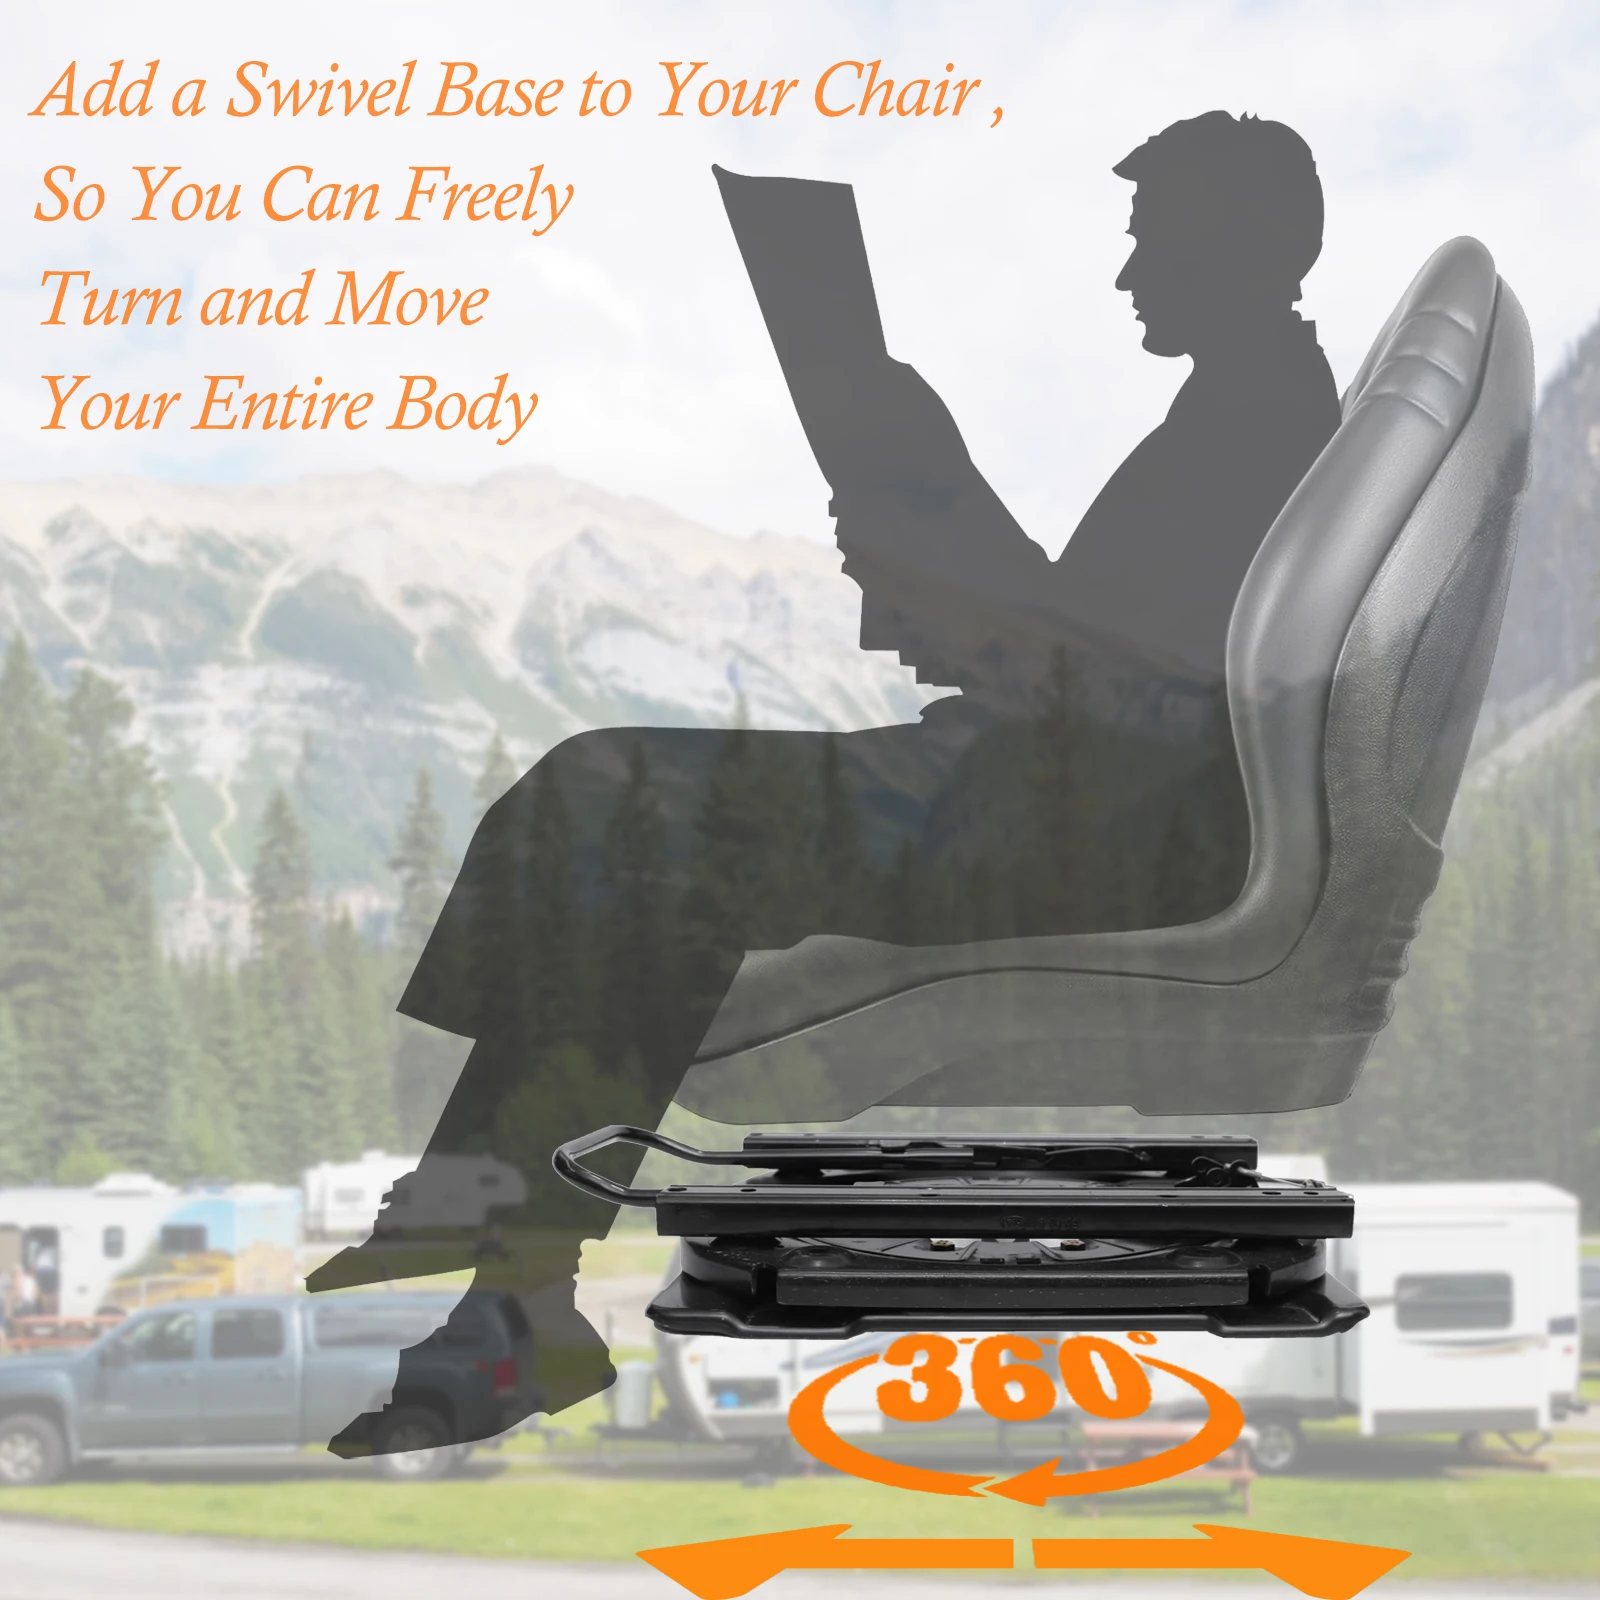 Heavy Duty Seat Swivel Base with Slider, 3.0mm Steel Plate Swivel Seat Base 360 Degree Rotatable for RV Van Camper Boat TruckBus andoer l5i pro camera video dolly slider kit with 3 wheel auto dolly